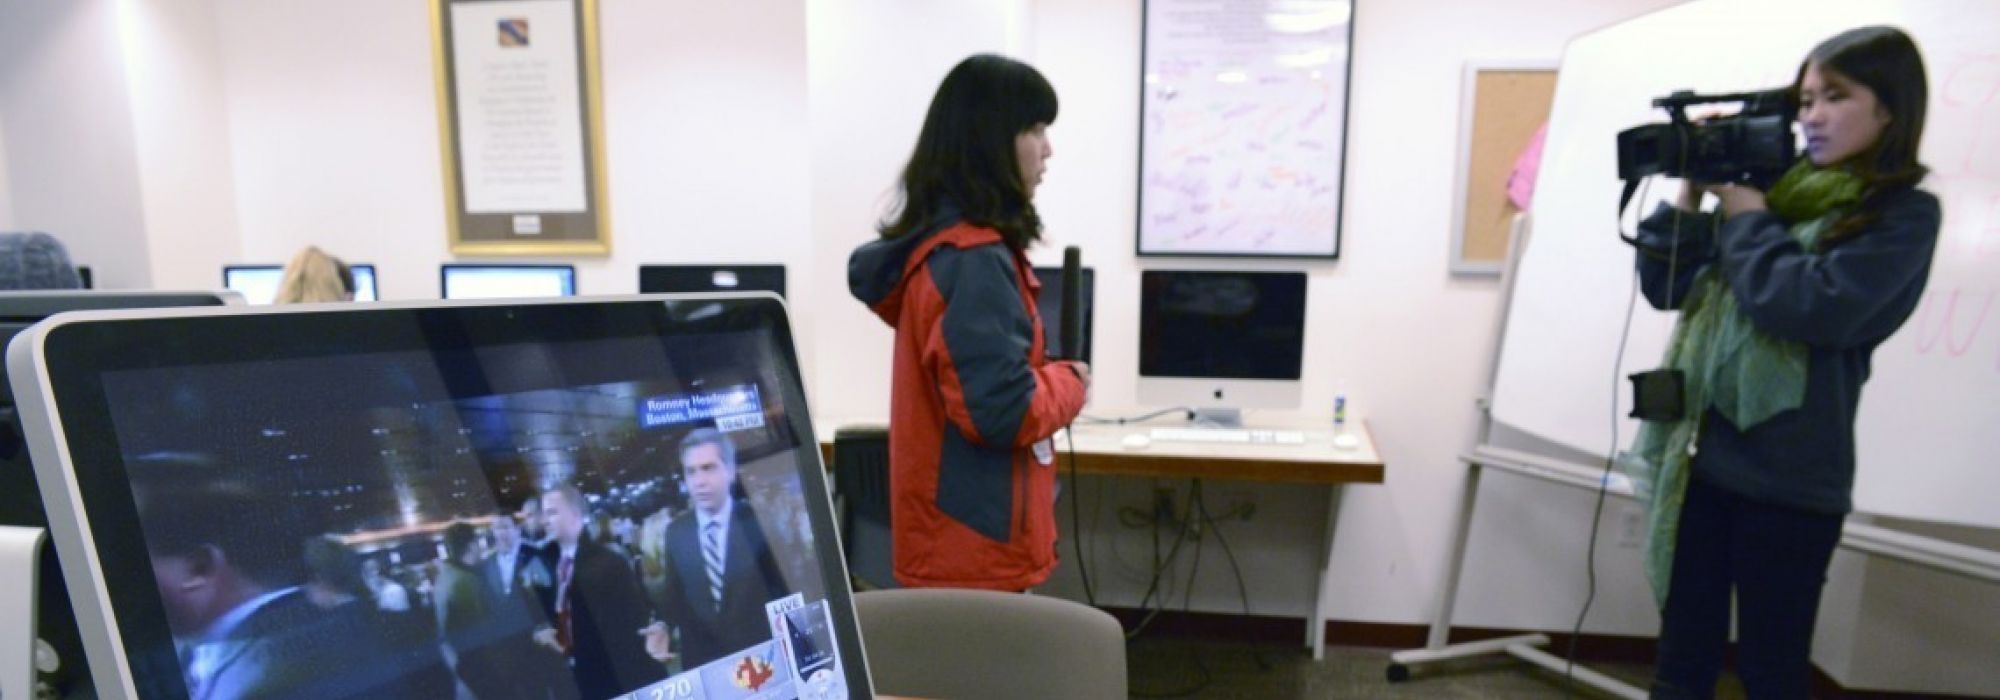 Two students in a conference room filming a news segment. On the left is a student wearing a red and blue rain coat and talking into a microphone. On the right is a student wearing a blue sweater and bright green scarf operating a video camera.